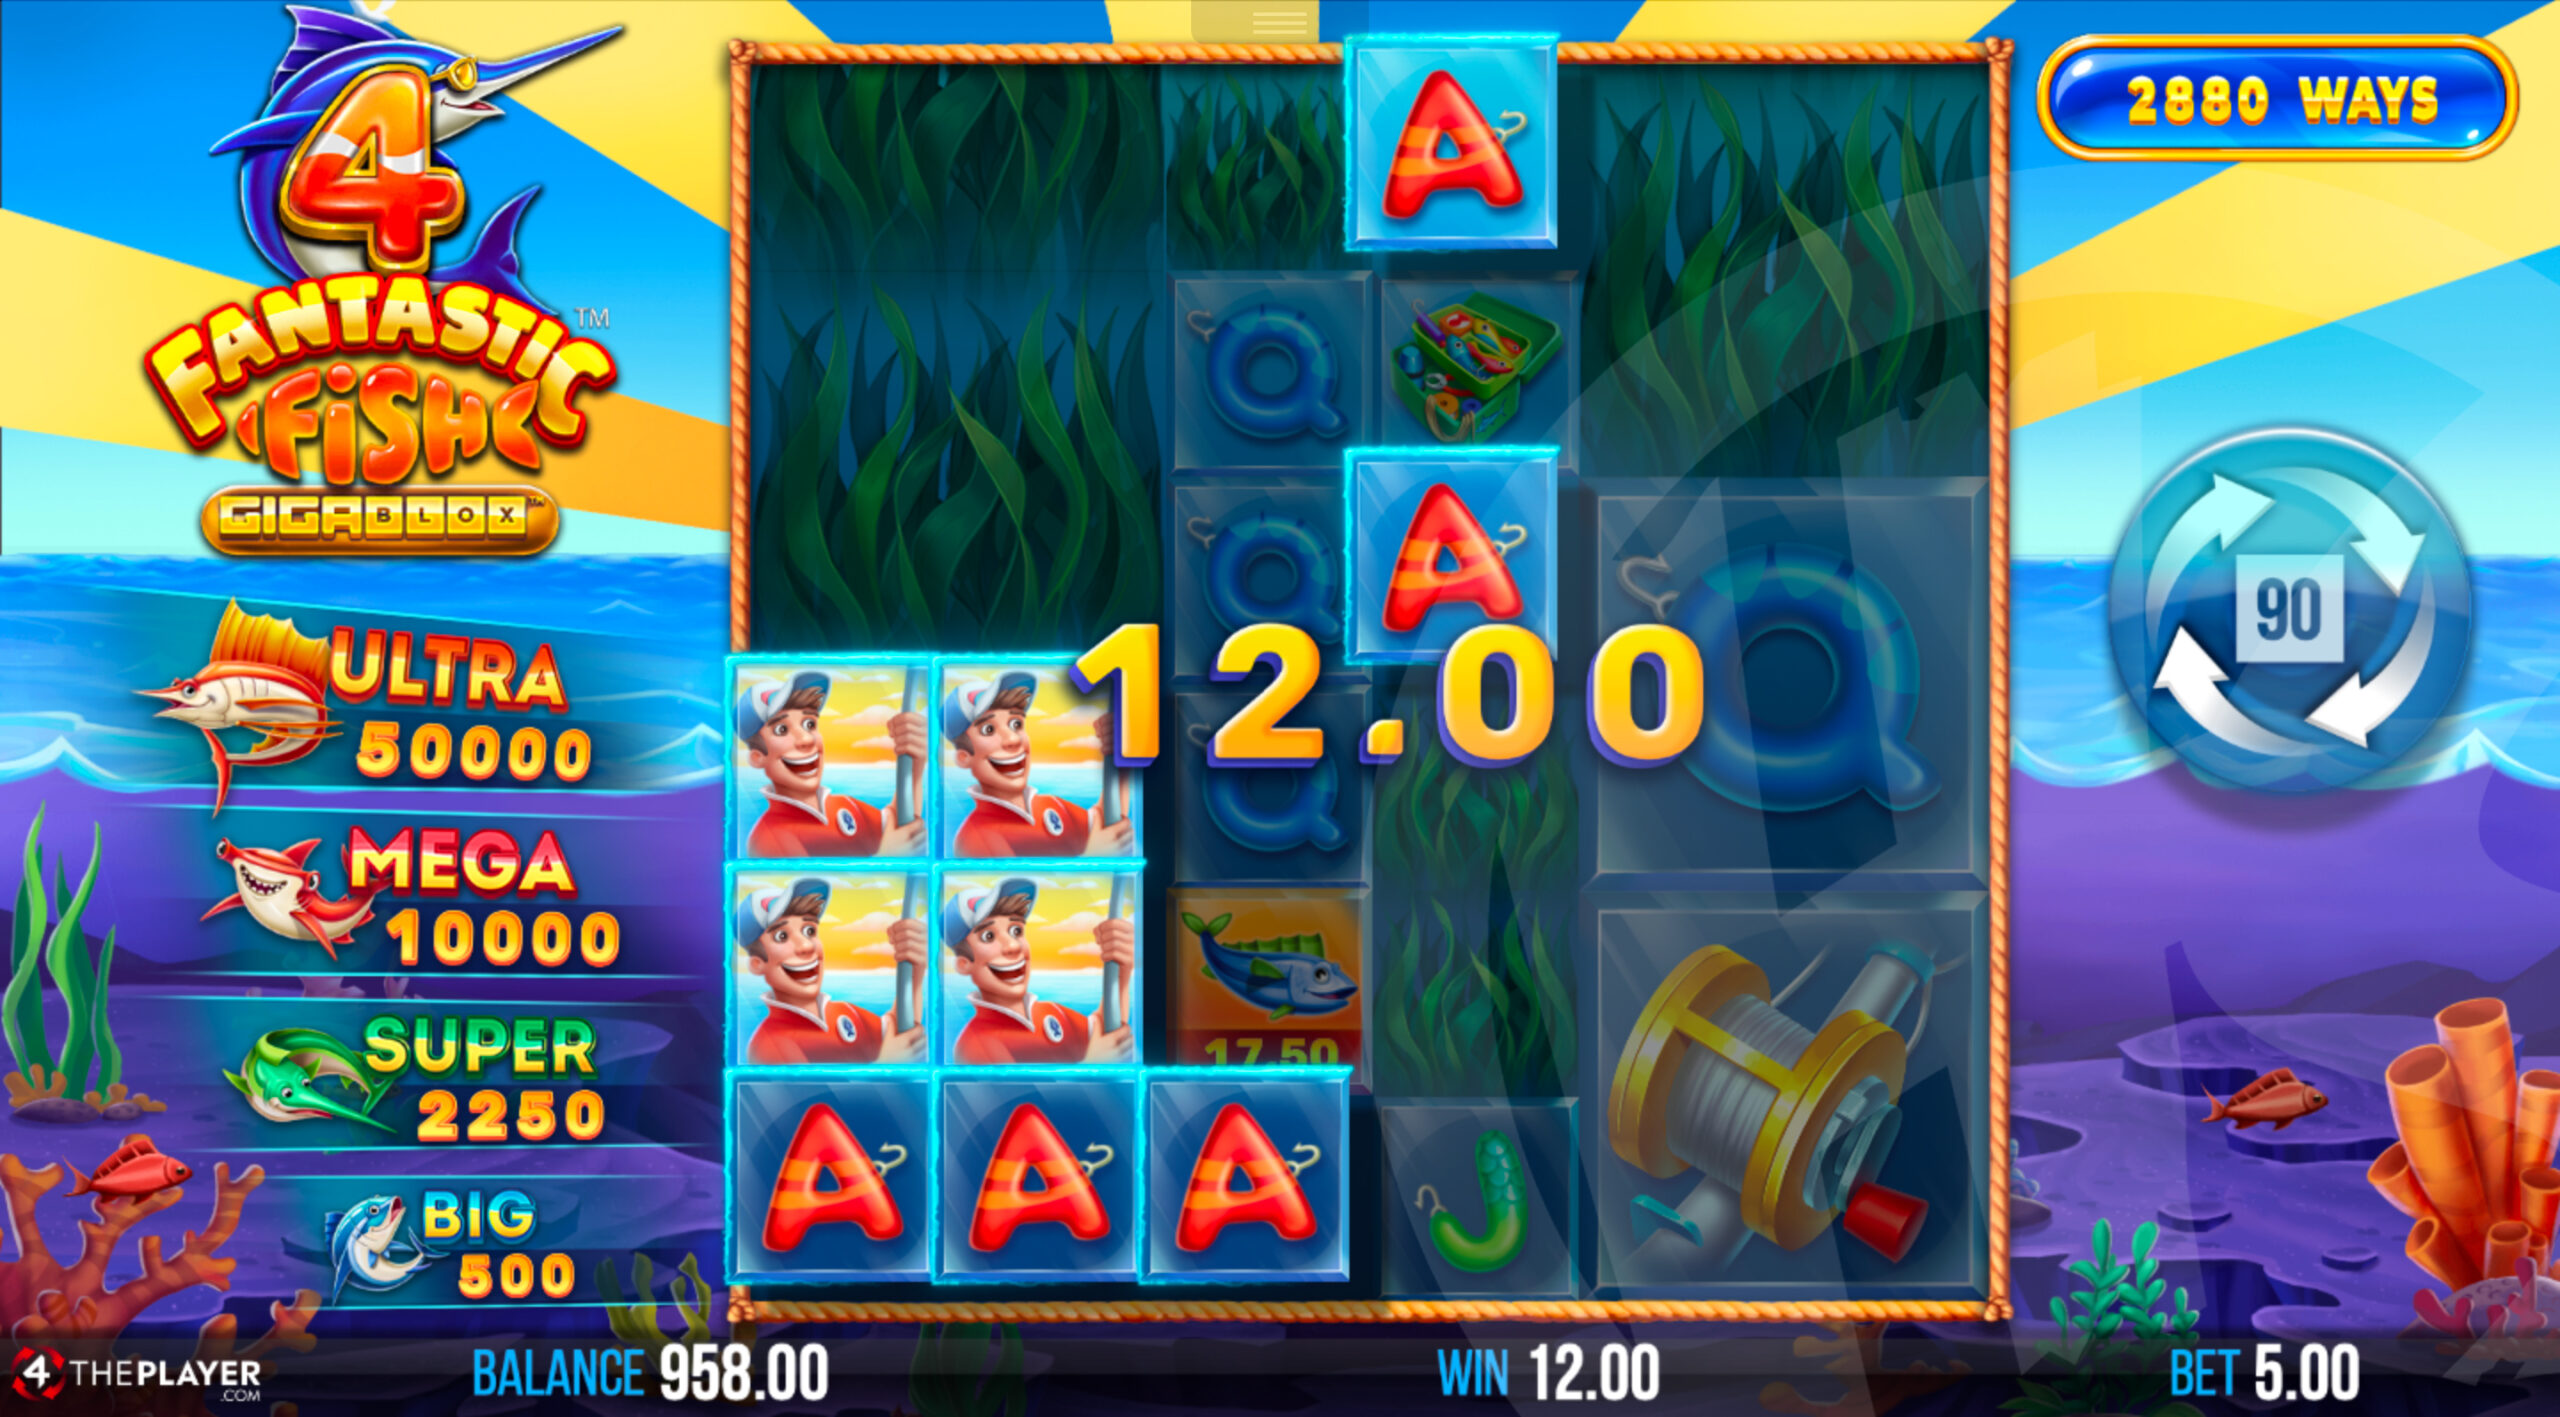 4 Fantastic Fish Gigablox Offers Players up to 46,656 Ways to Win